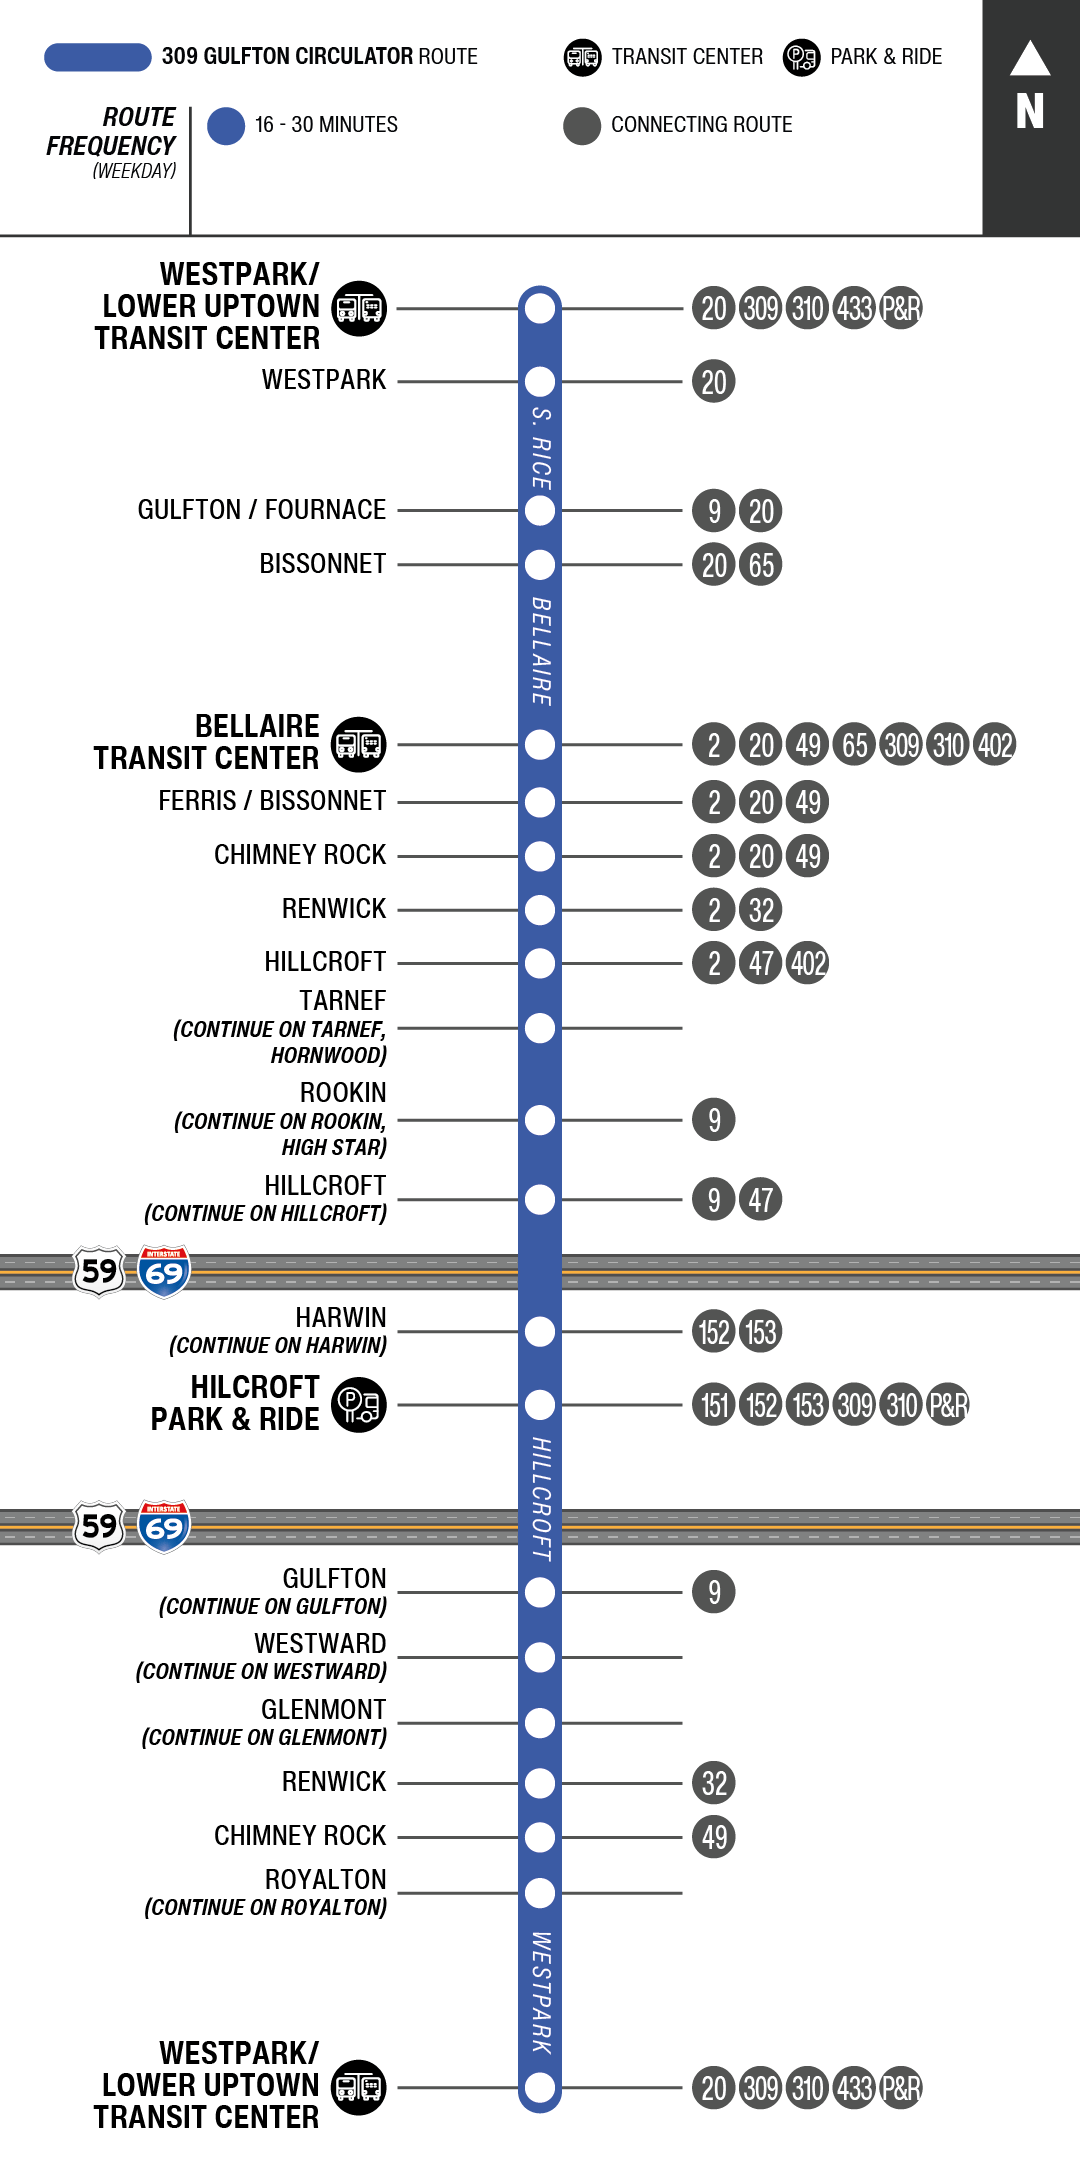 Route map for 309 Gulfton Circulator bus